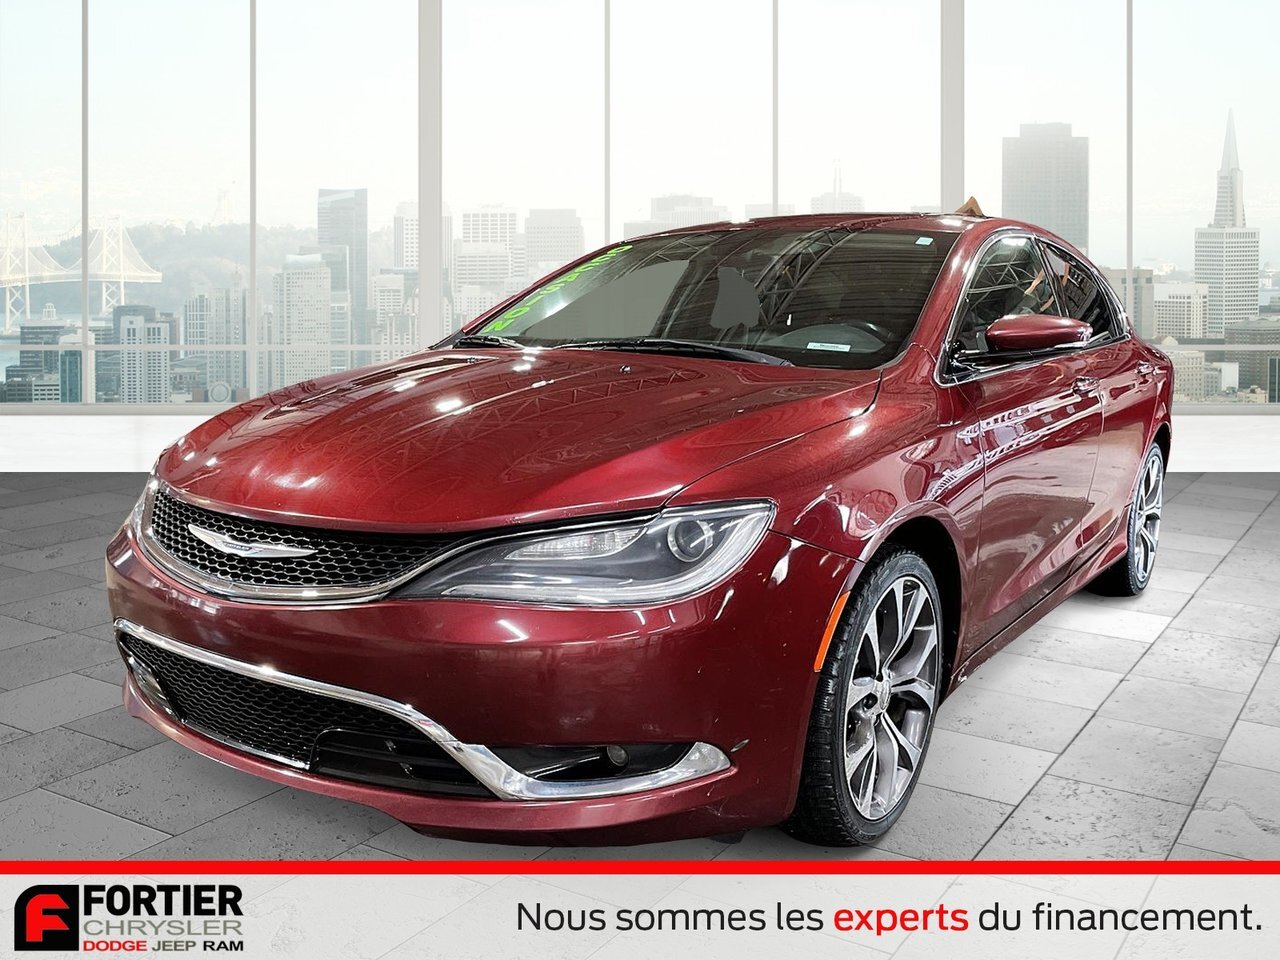 2016 Chrysler 200 C SUNROOF + LEATHER+ V6 +8.4 UCONNECT + MAGS / TOI